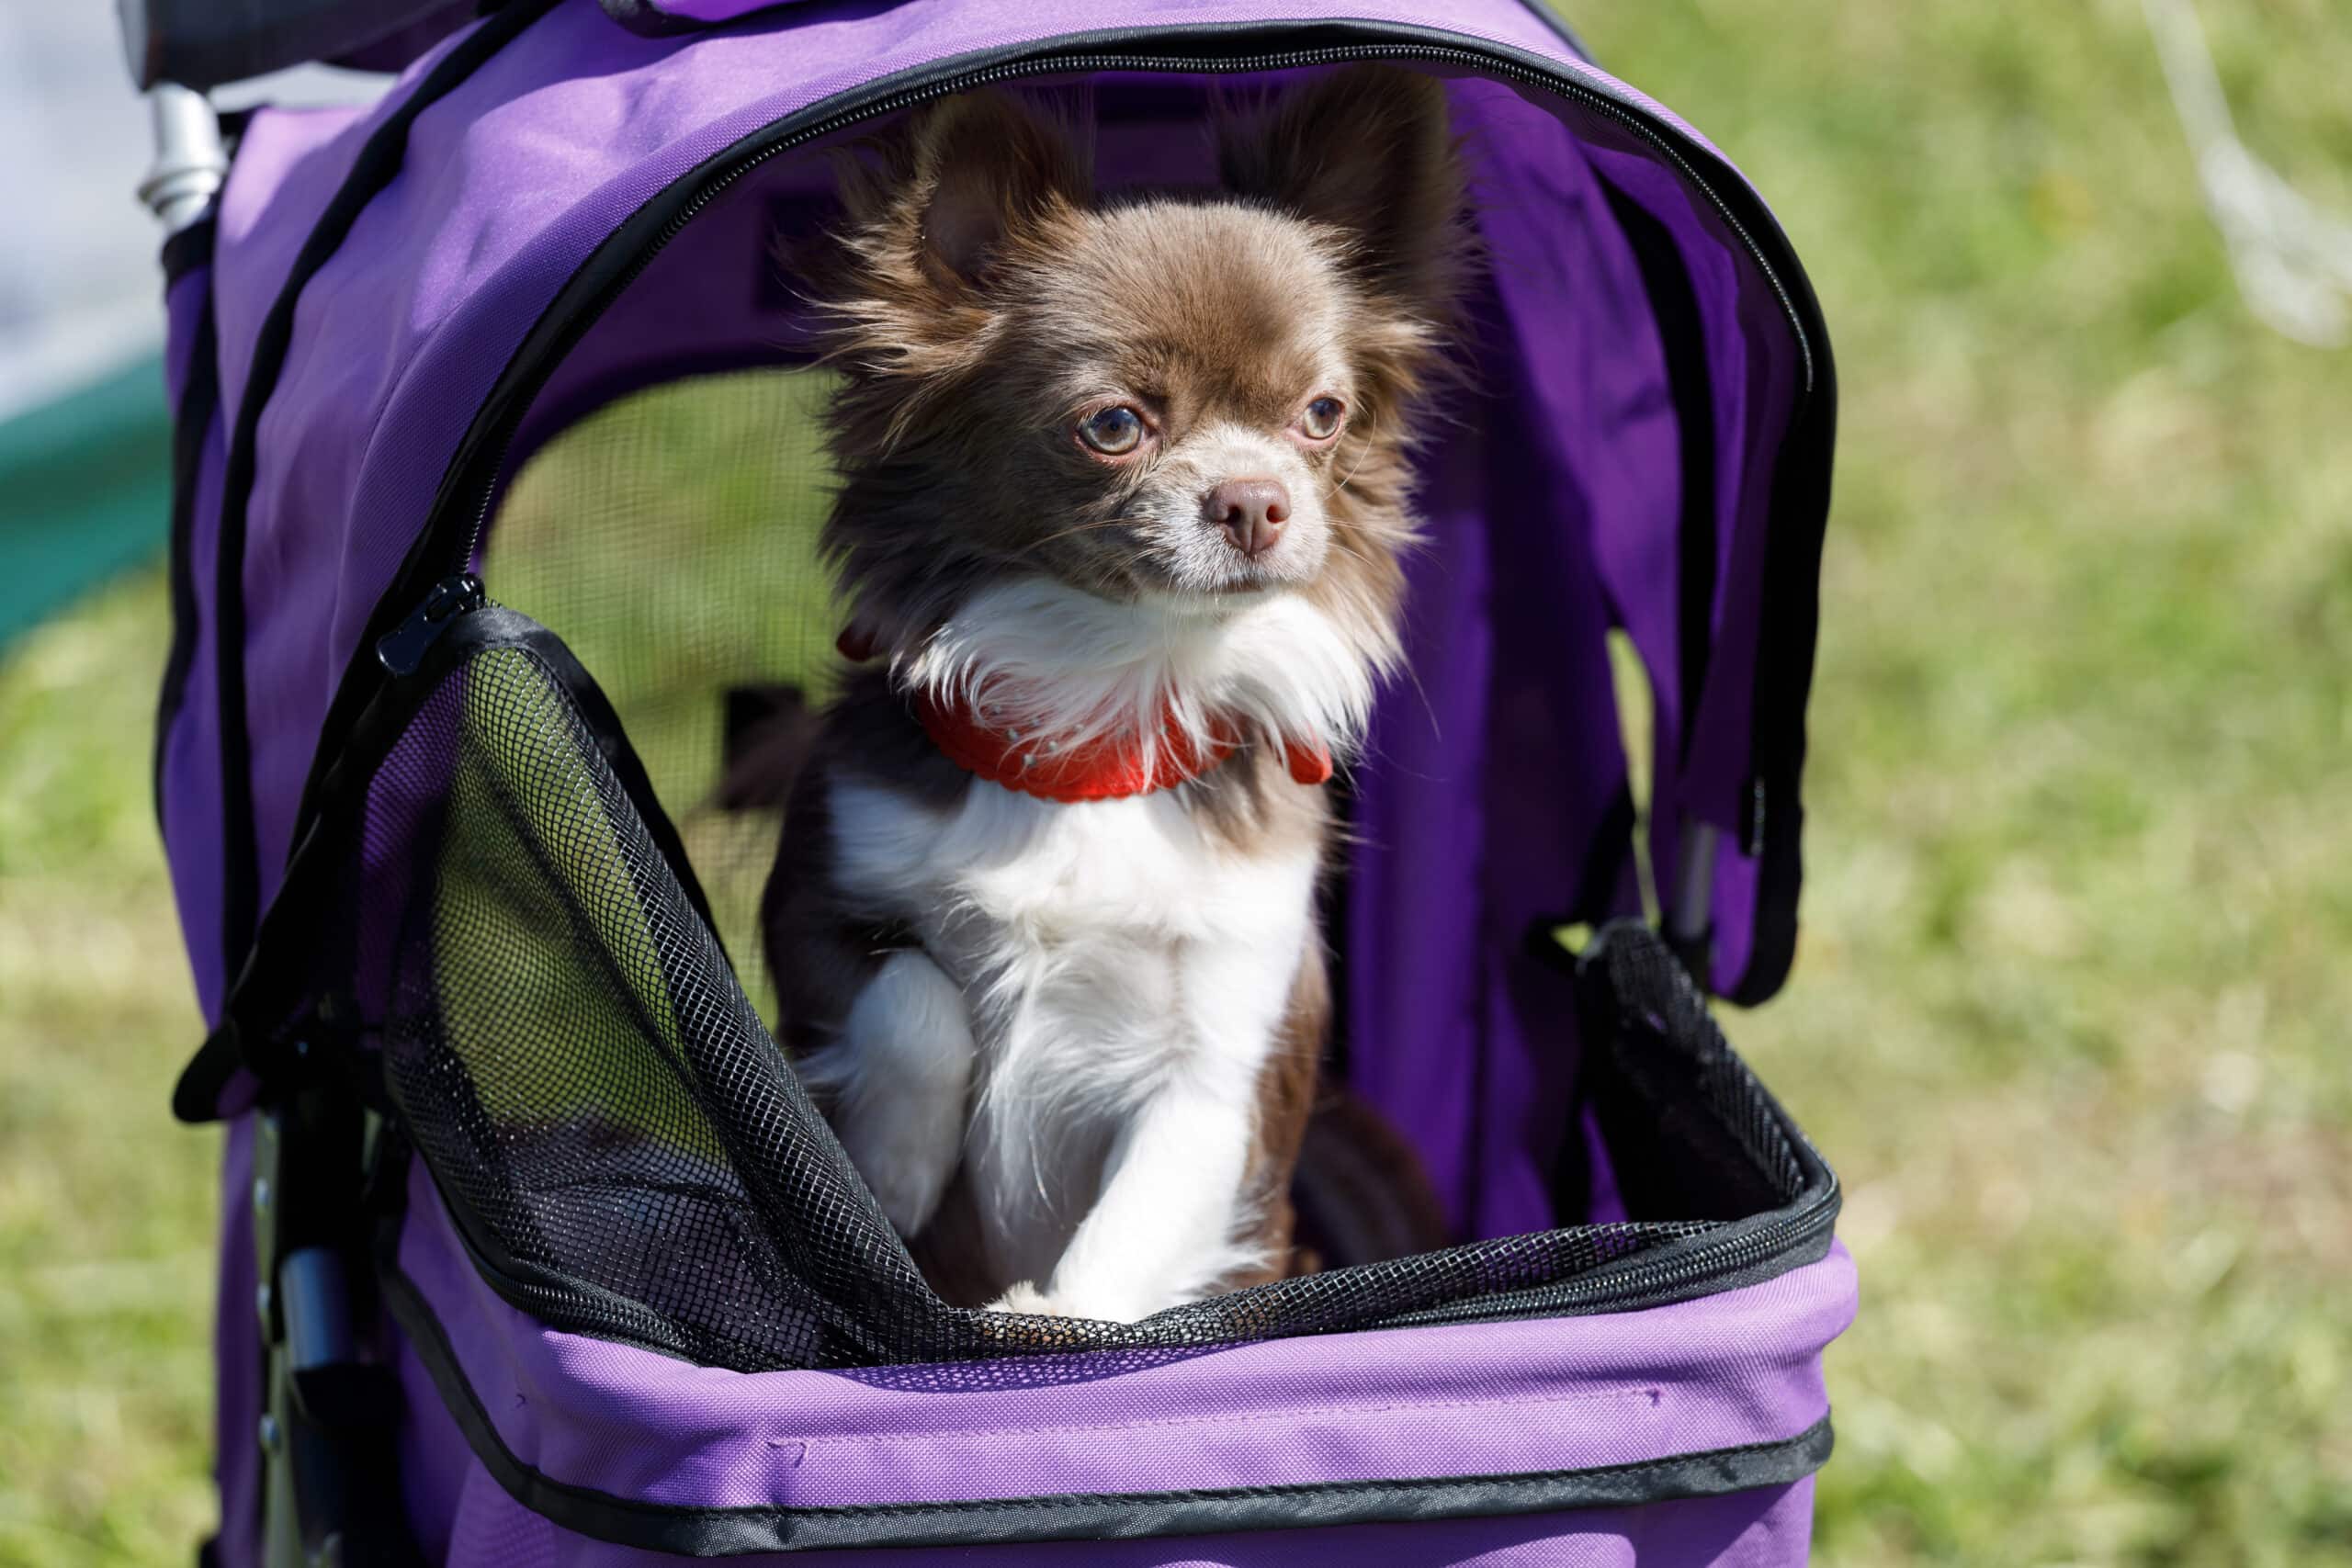 A Chihuahua dog sits in a stroller.